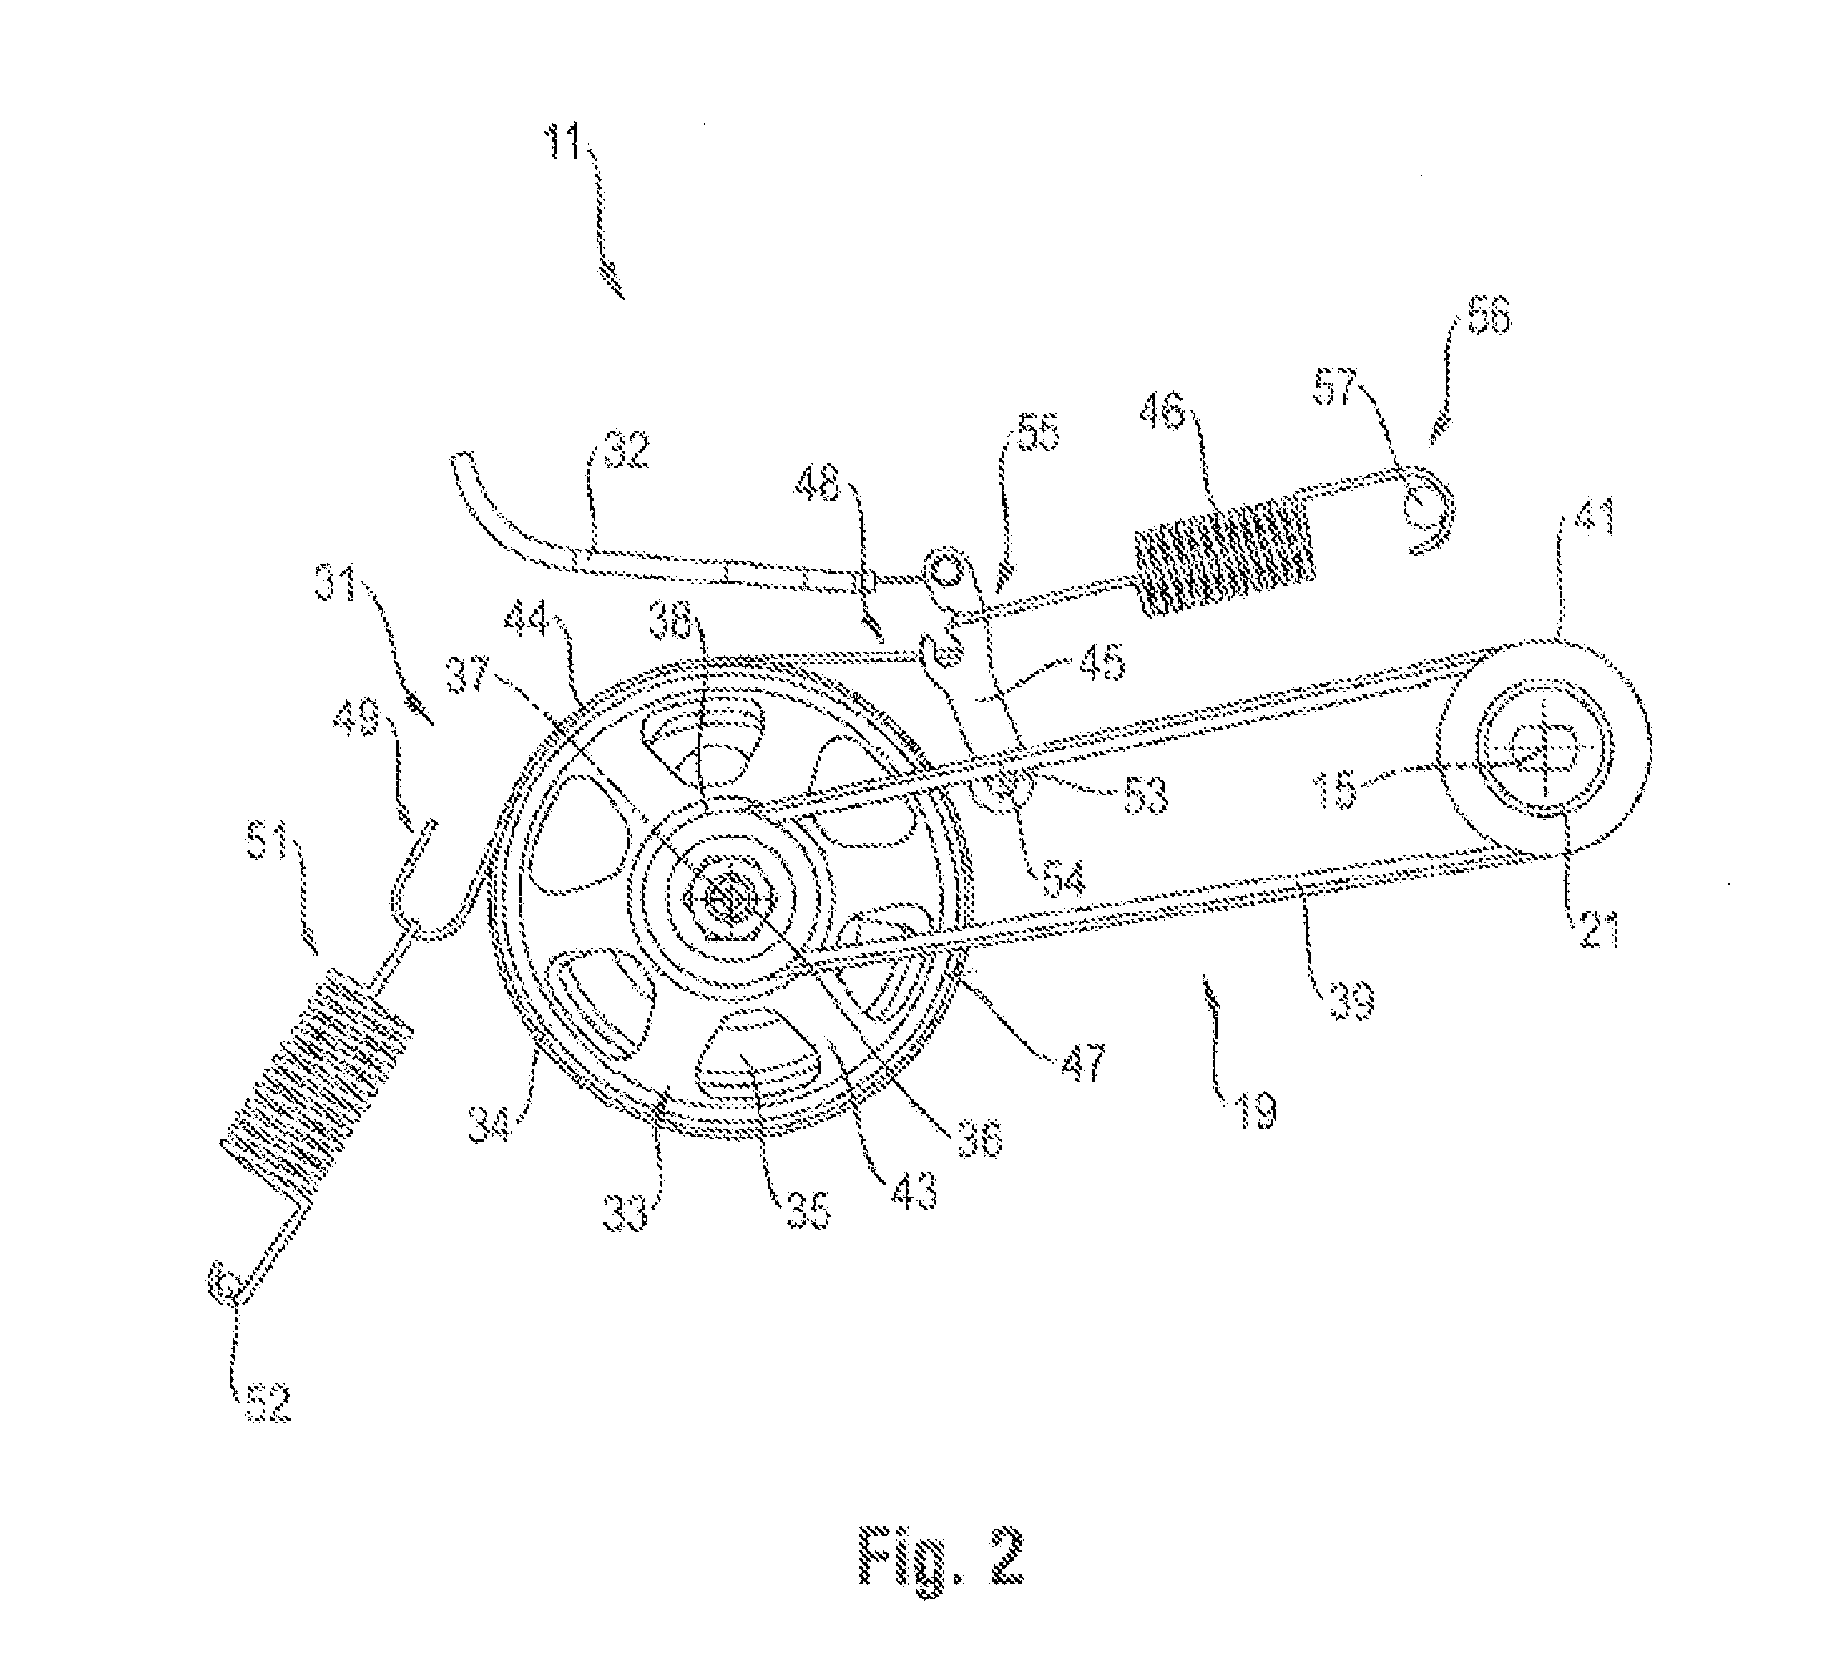 Hand-Operated Tool Device With A Brake Mechanism For Braking A Machining Tool